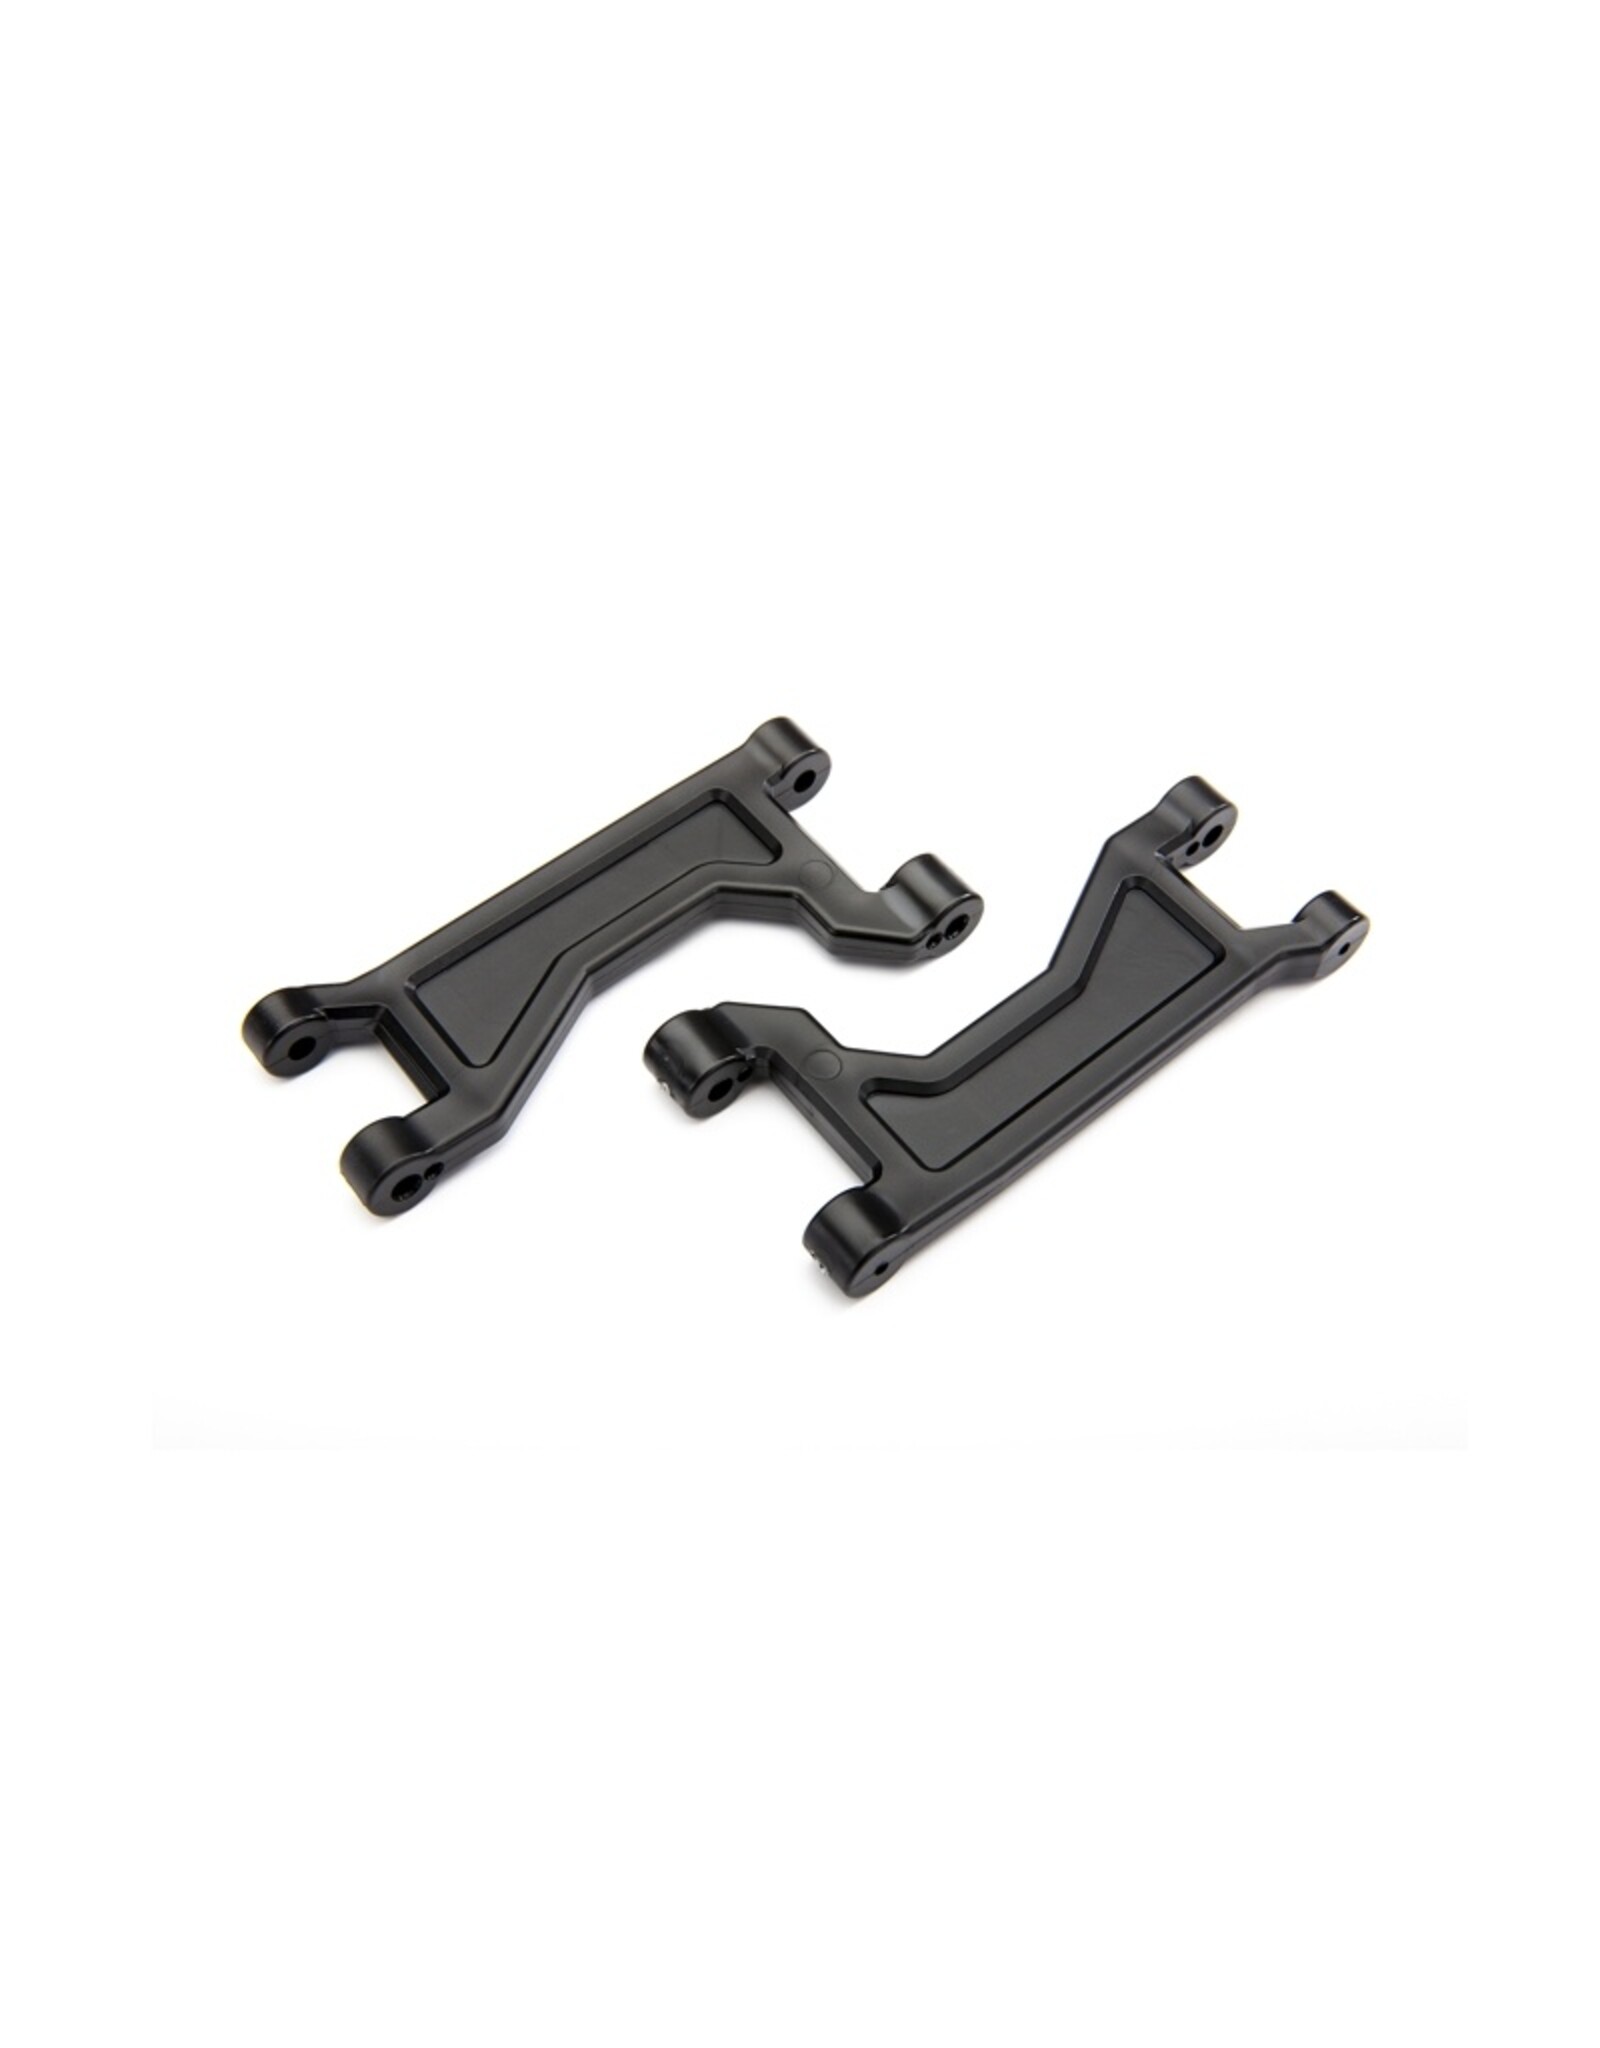 Traxxas tra8929 - Suspension arms, upper, black (left or right, front or rear) (2)